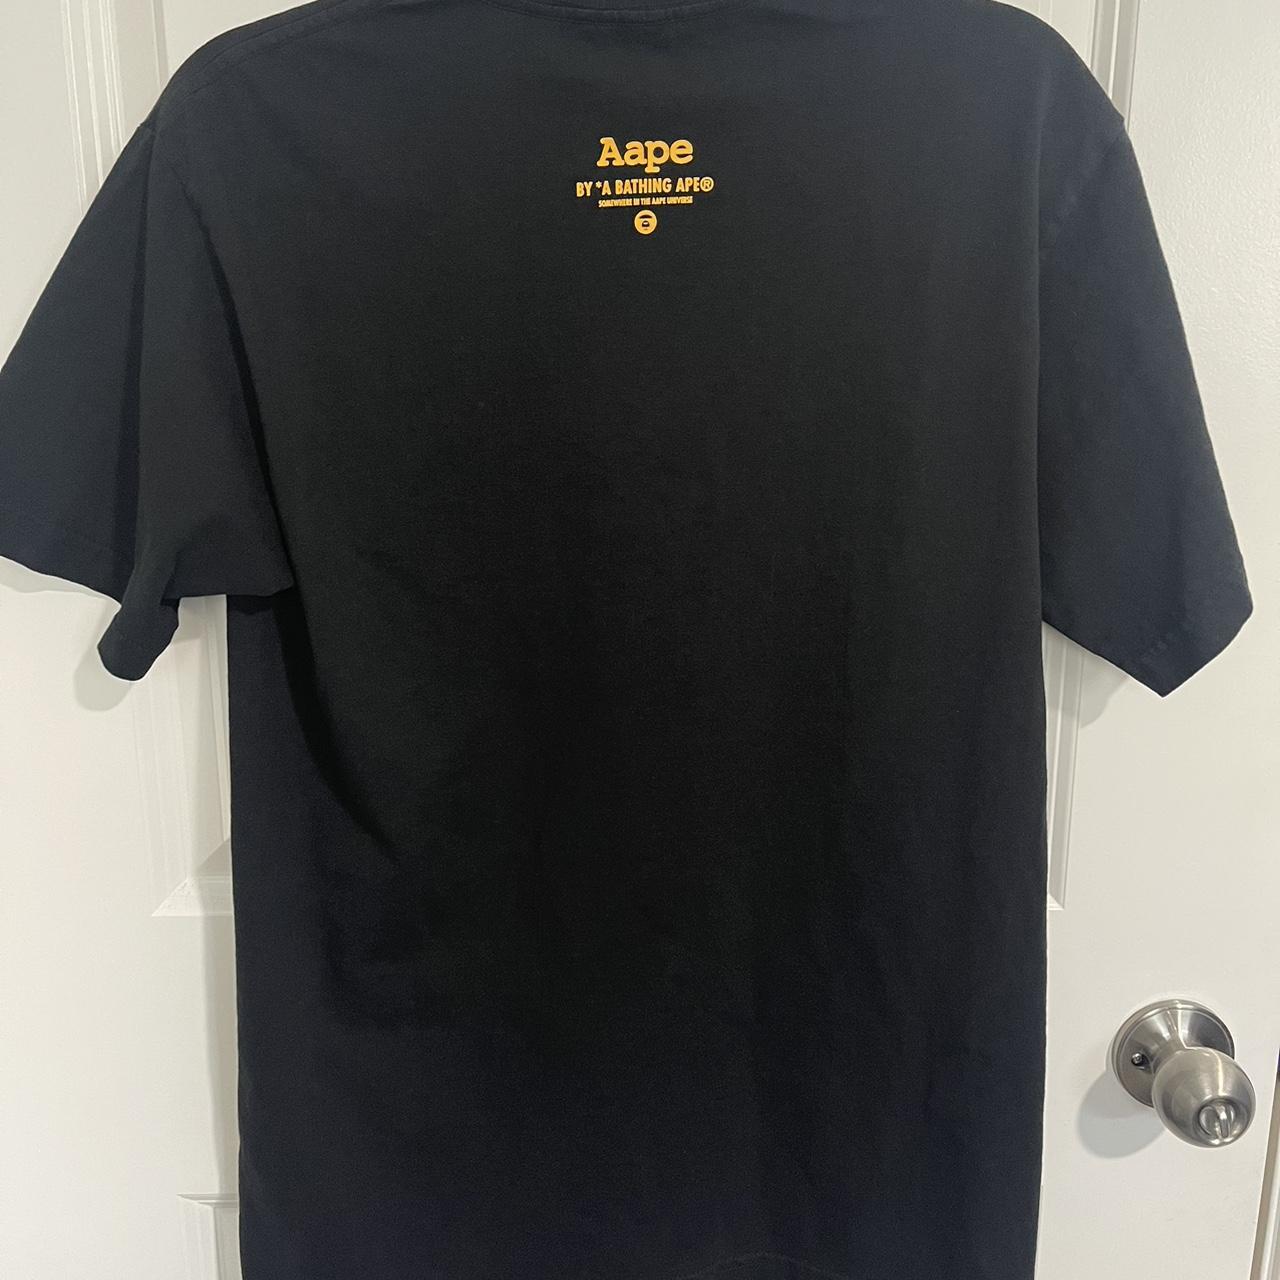 aape by a bathing ape lakers t shirt